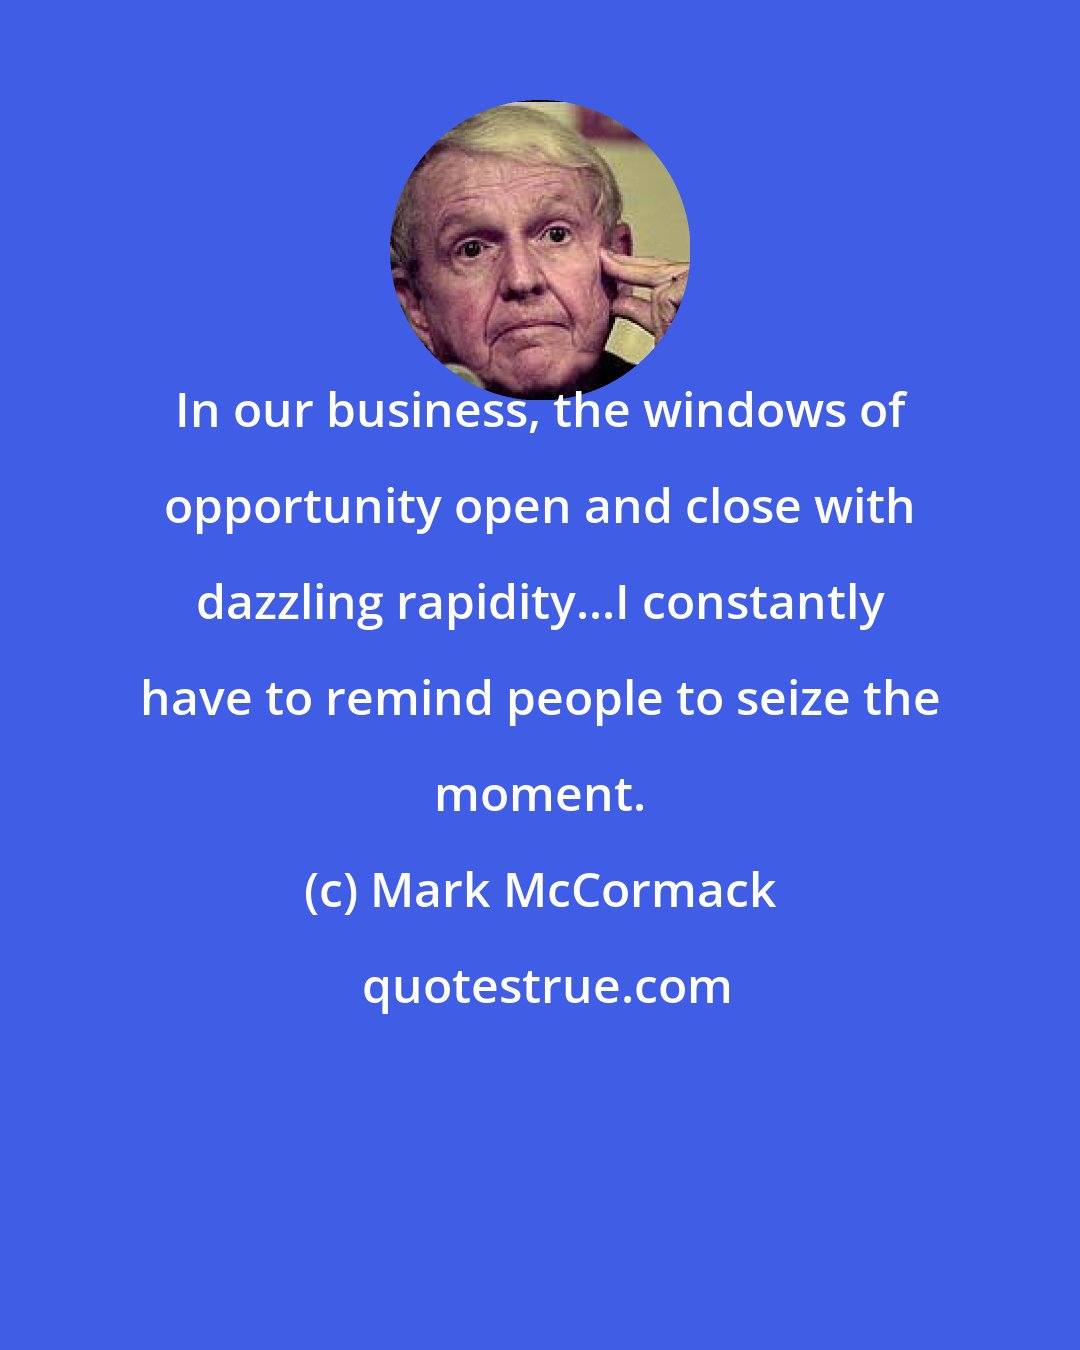 Mark McCormack: In our business, the windows of opportunity open and close with dazzling rapidity...I constantly have to remind people to seize the moment.